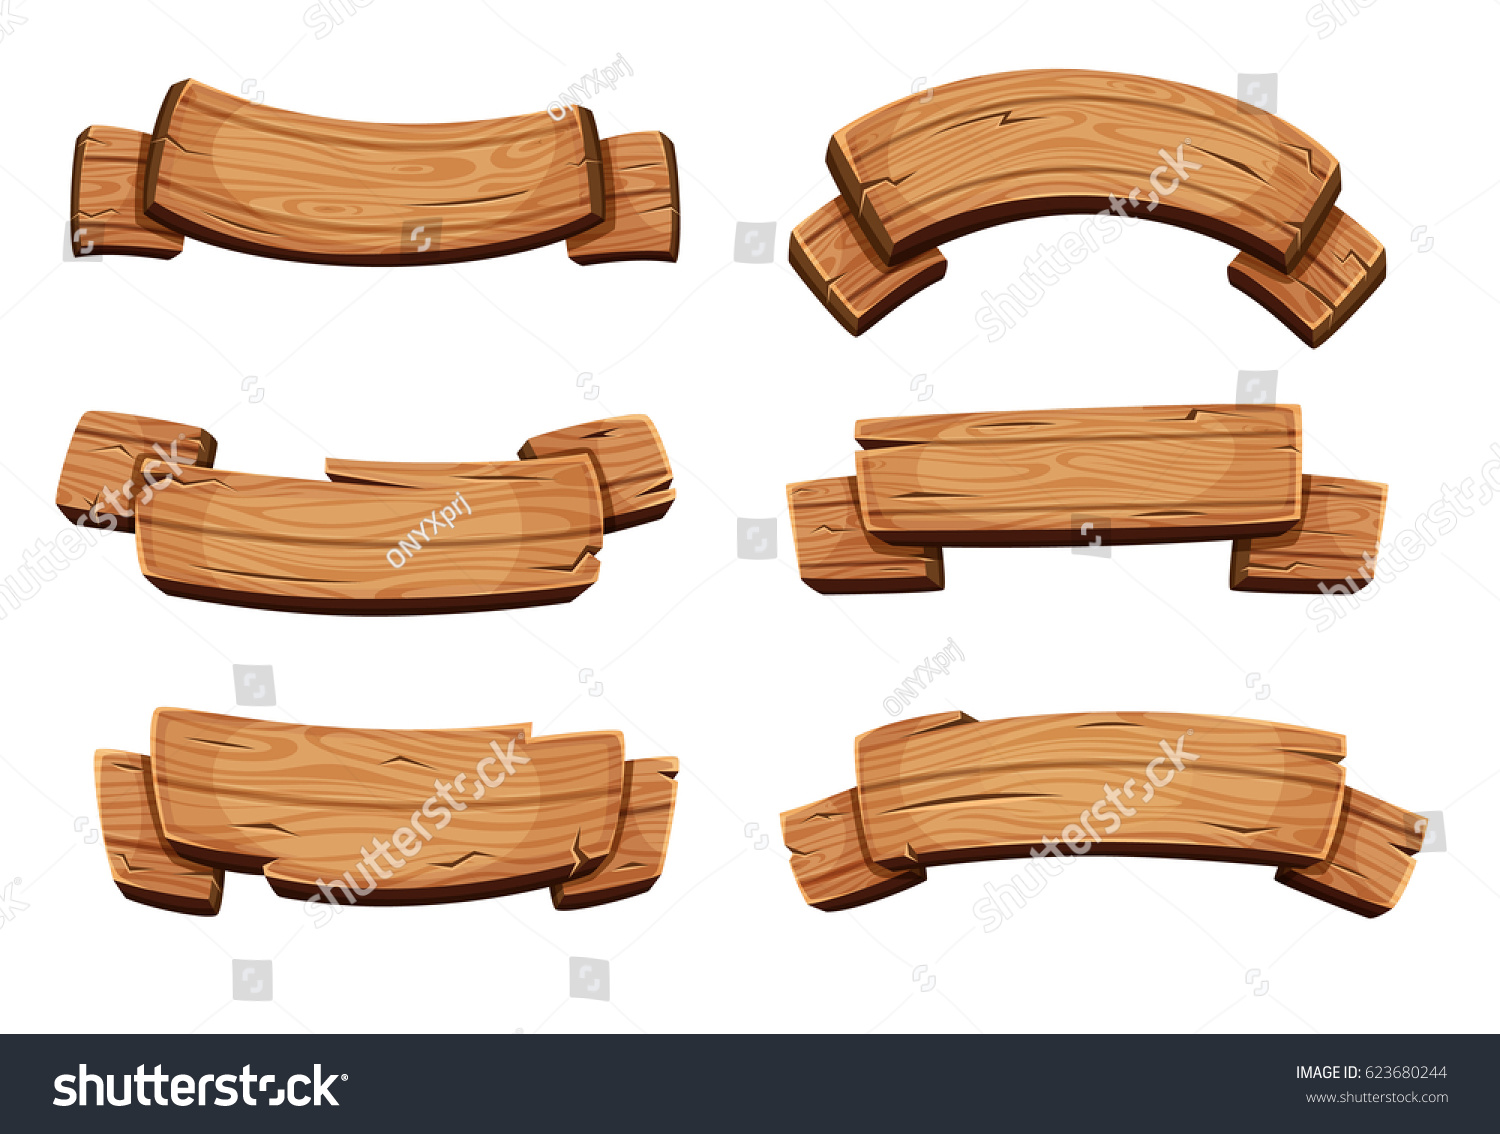 Cartoon brown wooden plate and ribbons. Vector set isolate on white background. Wooden ribbons collection, illustration of wood board #623680244